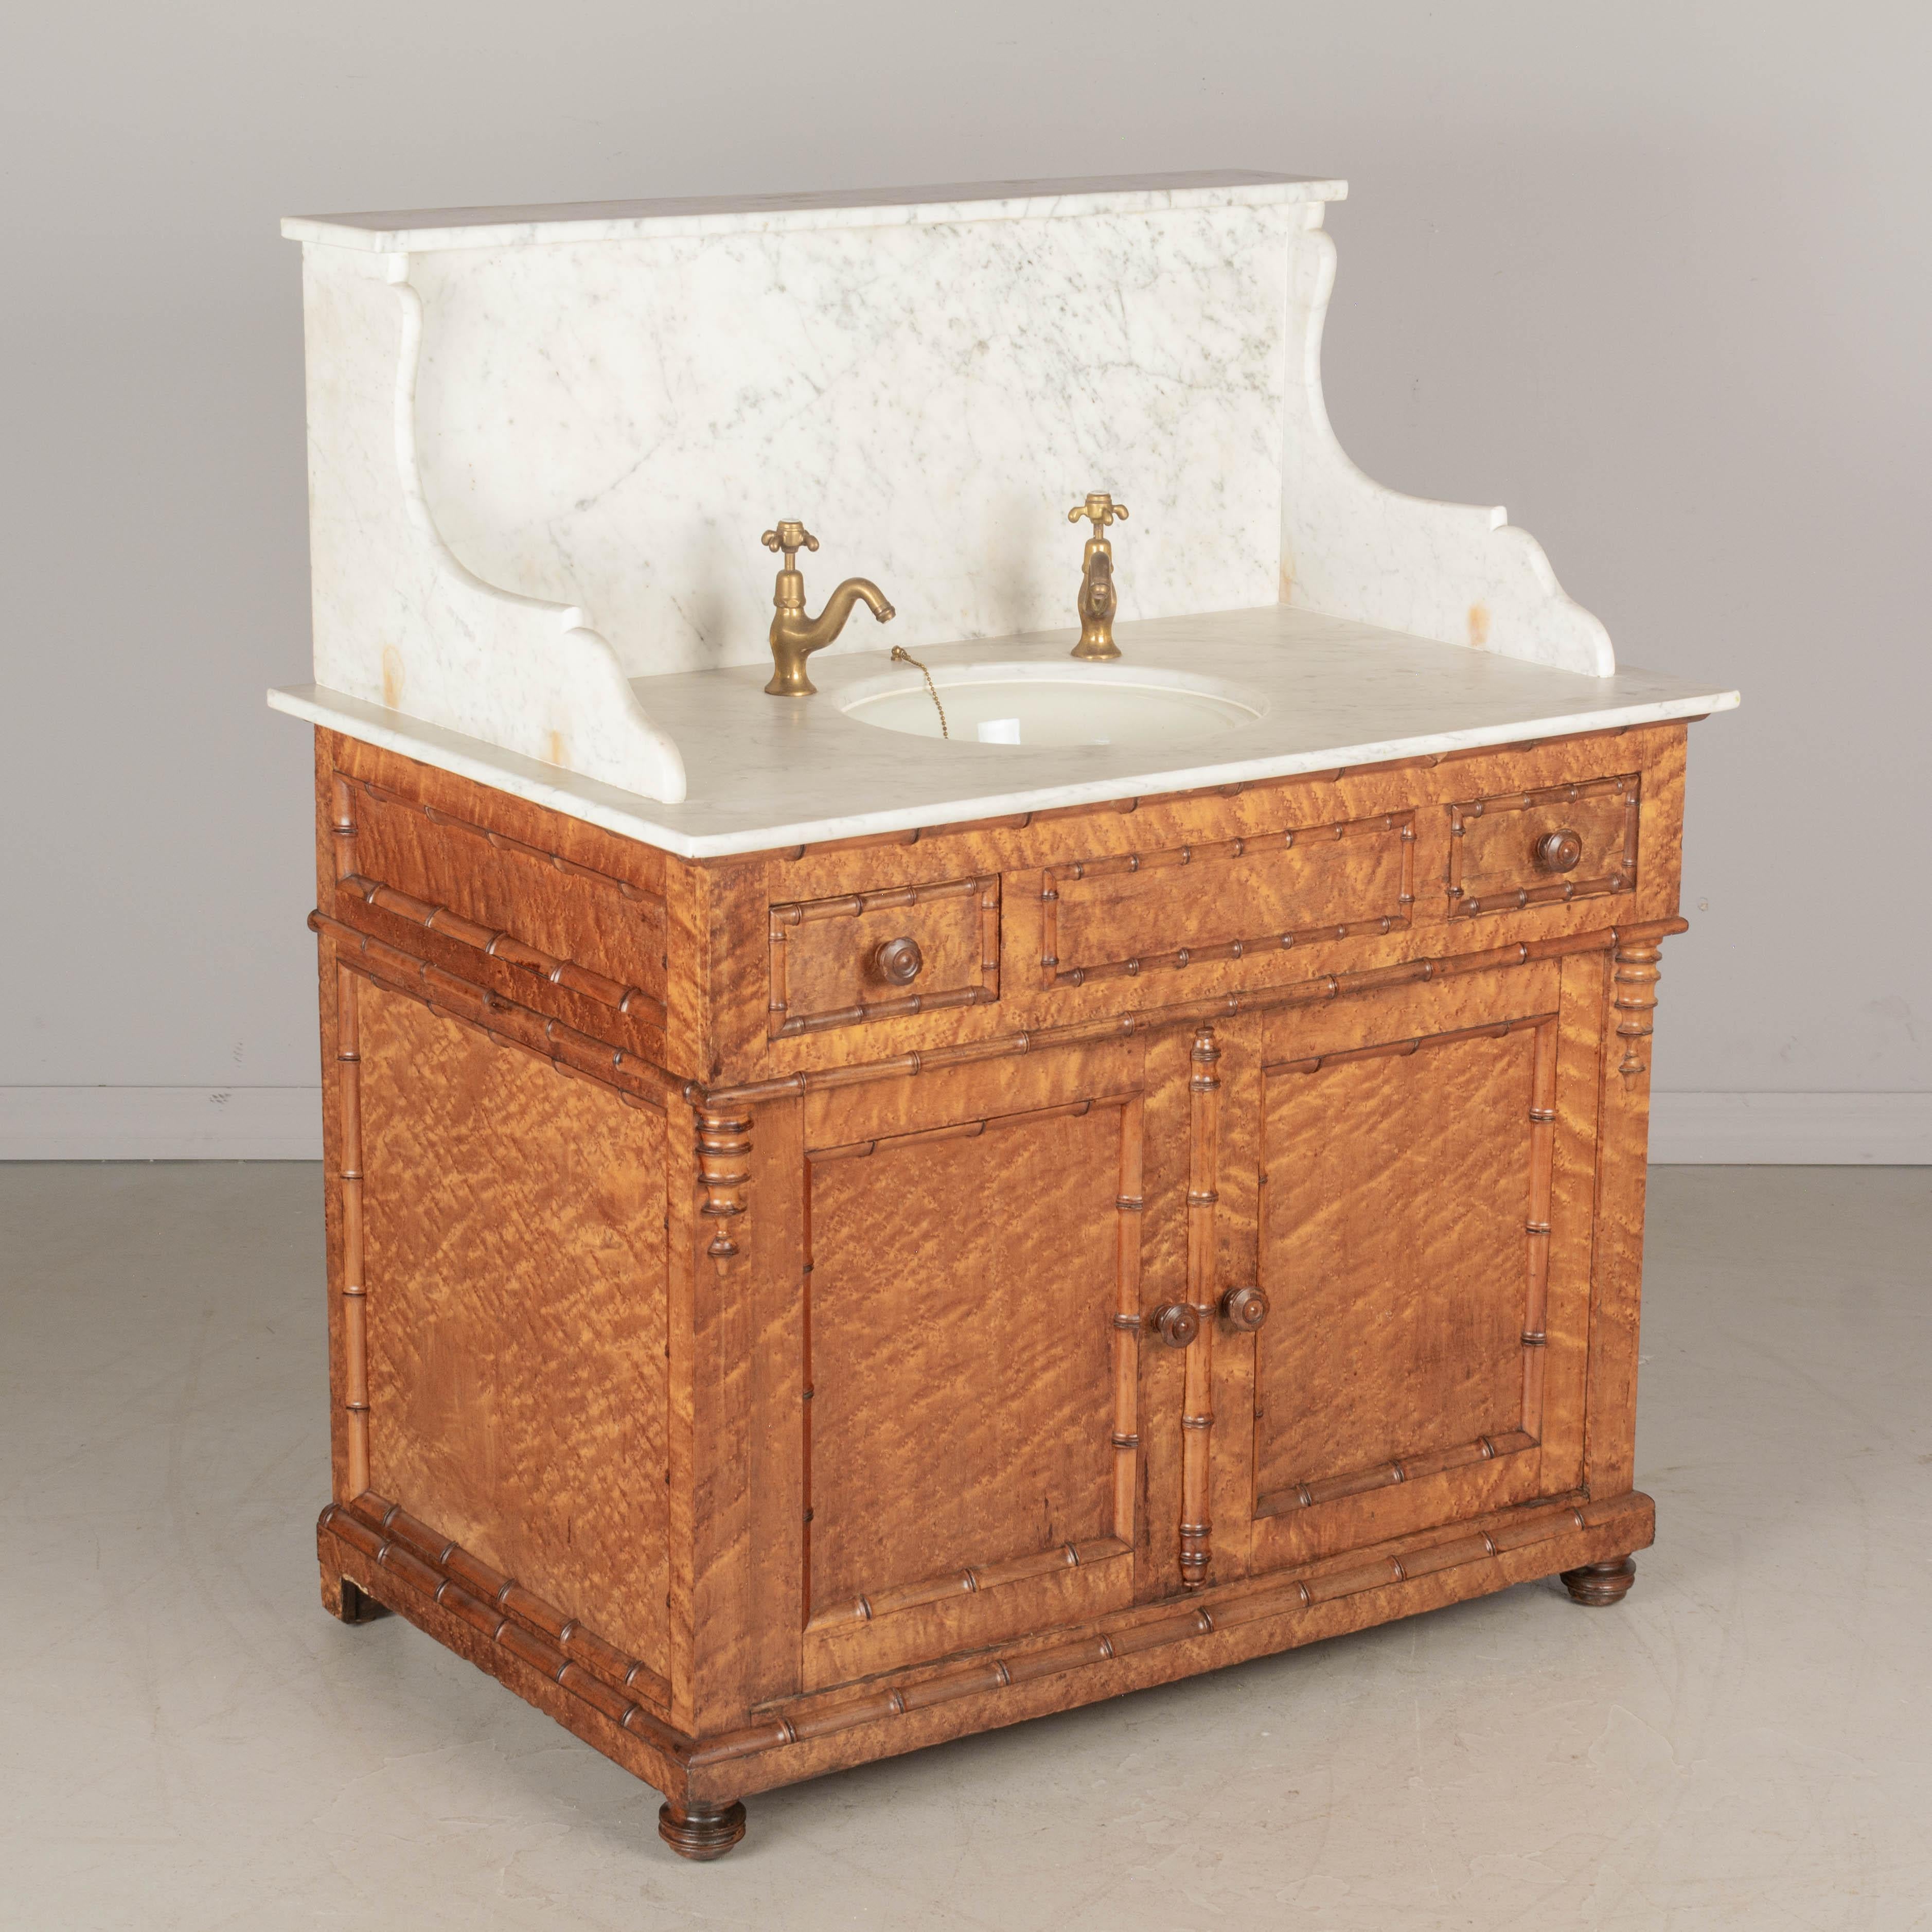 A 19th century French faux bamboo marble top bathroom vanity. Made of solid oak with birdseye maple veneer and carved turned cherry wood faux bamboo decorative trim. Two dovetailed drawers and a cabinet below, opening to one new interior shelf and